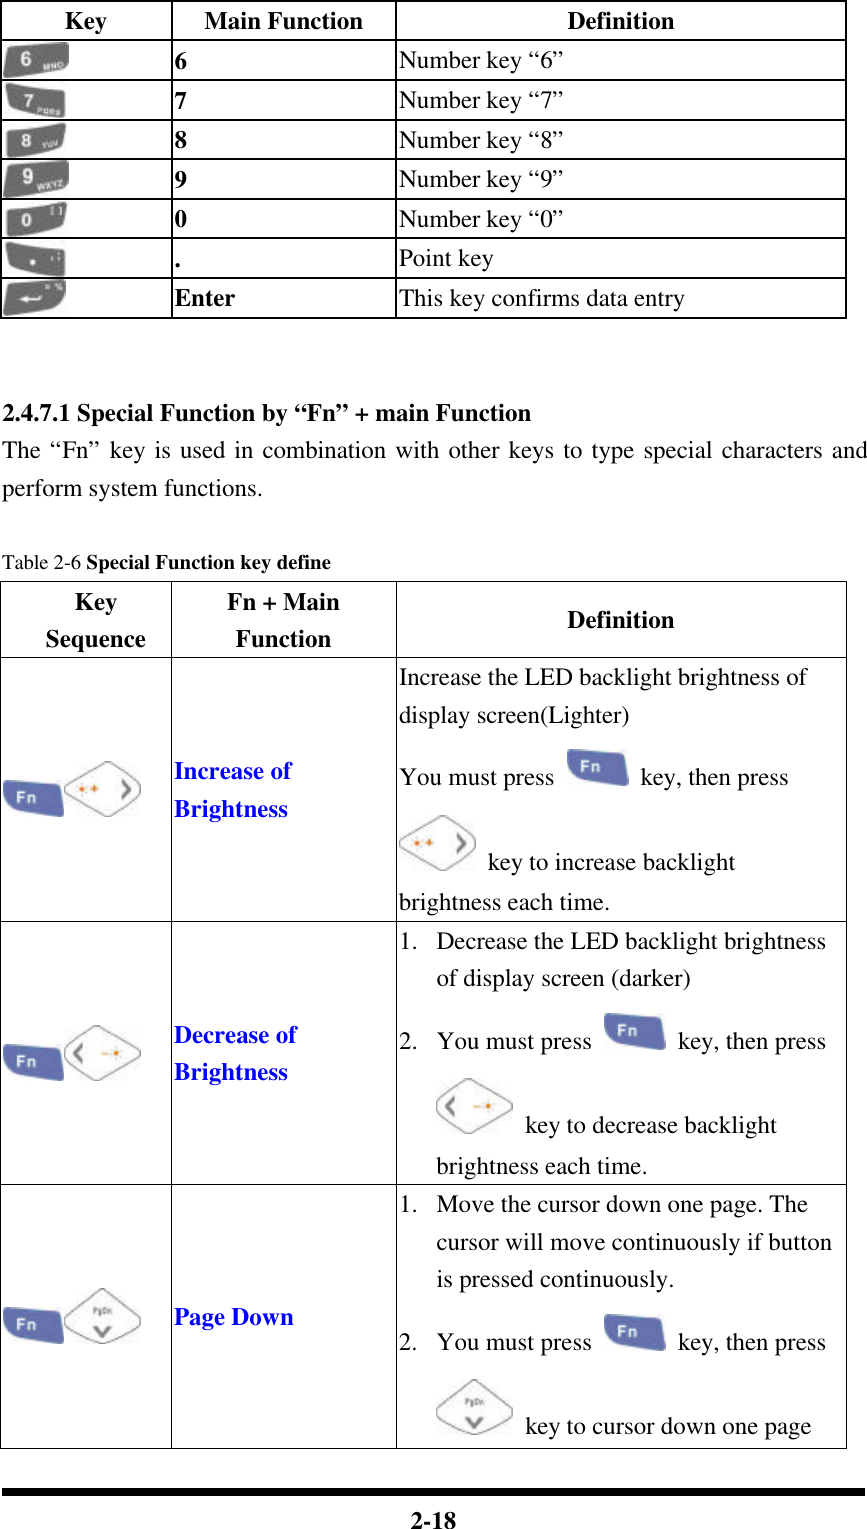  2-18 Key Main Function Definition  6  Number key “6”  7  Number key “7”  8  Number key “8”  9  Number key “9”  0  Number key “0”  .  Point key  Enter This key confirms data entry   2.4.7.1 Special Function by “Fn” + main Function The “Fn” key is used in combination with other keys to type special characters and perform system functions.  Table 2-6 Special Function key define Key Sequence Fn + Main Function Definition  Increase of Brightness Increase the LED backlight brightness of display screen(Lighter) You must press   key, then press  key to increase backlight brightness each time.  Decrease of Brightness 1.  Decrease the LED backlight brightness of display screen (darker) 2.  You must press   key, then press  key to decrease backlight brightness each time.  Page Down 1.  Move the cursor down one page. The cursor will move continuously if button is pressed continuously. 2.  You must press   key, then press  key to cursor down one page 